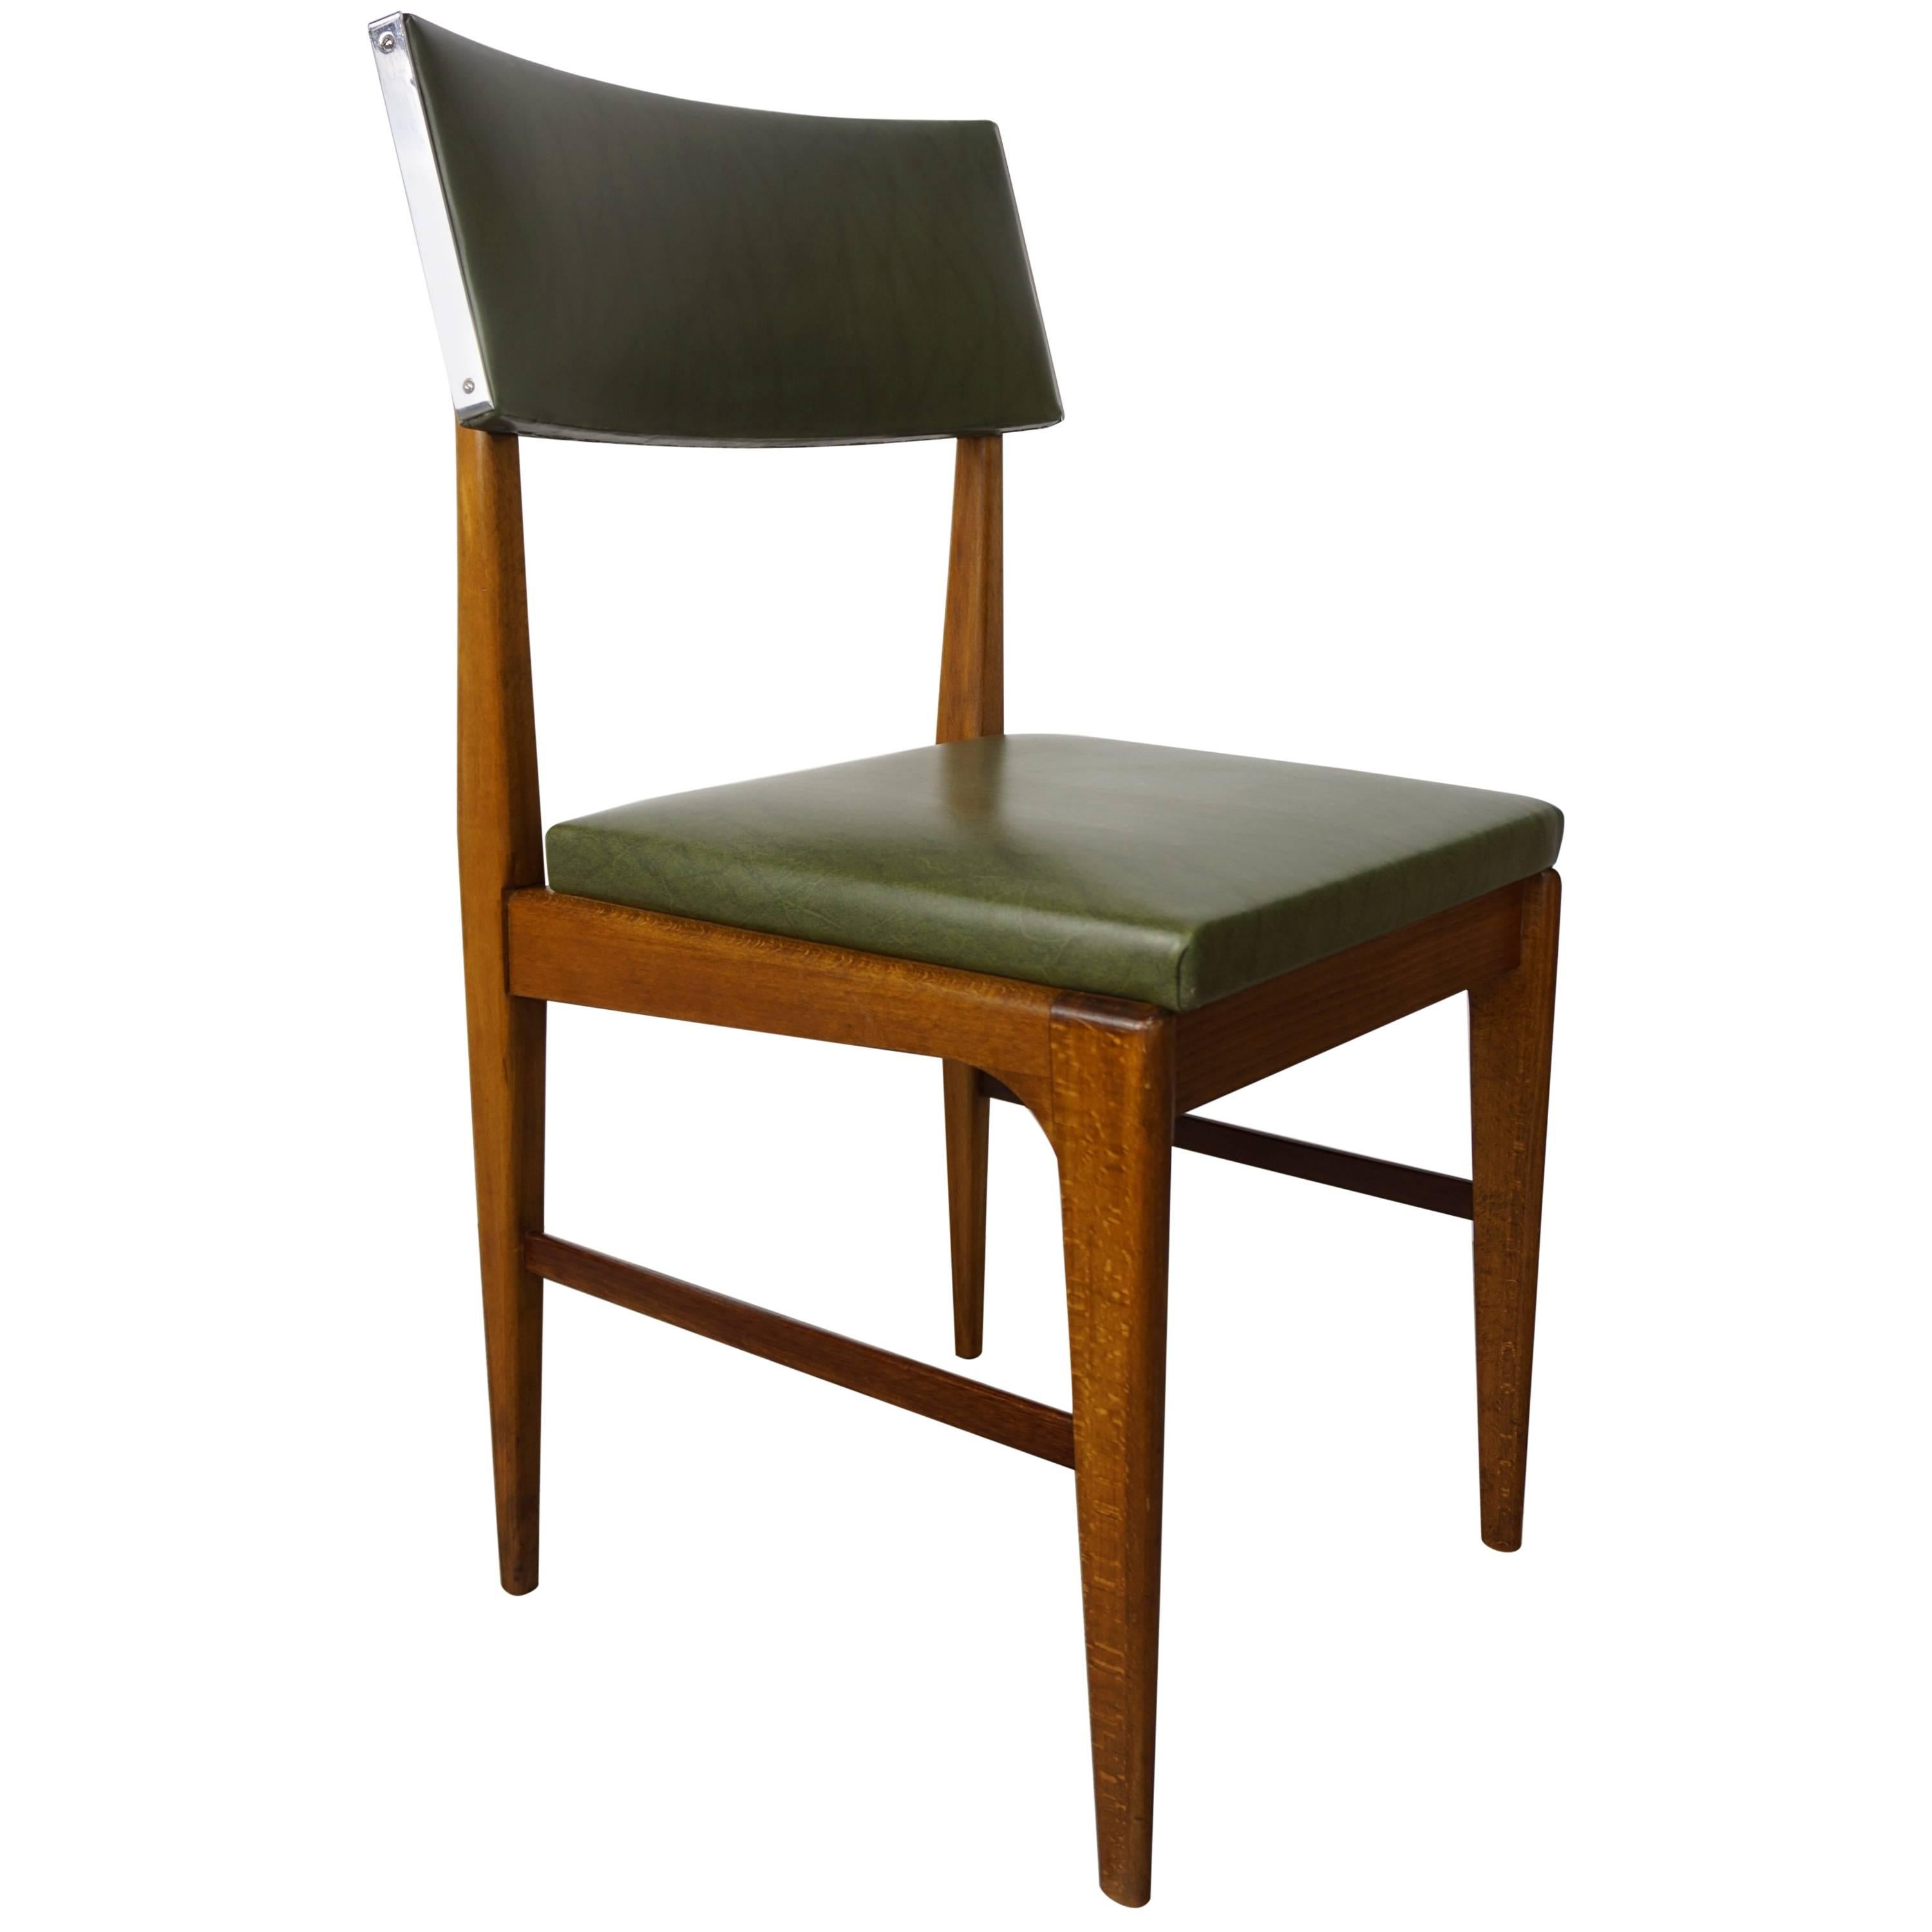 Wooden Teak and Green Faux Leather Scandinavian Style Dutch Design Chair